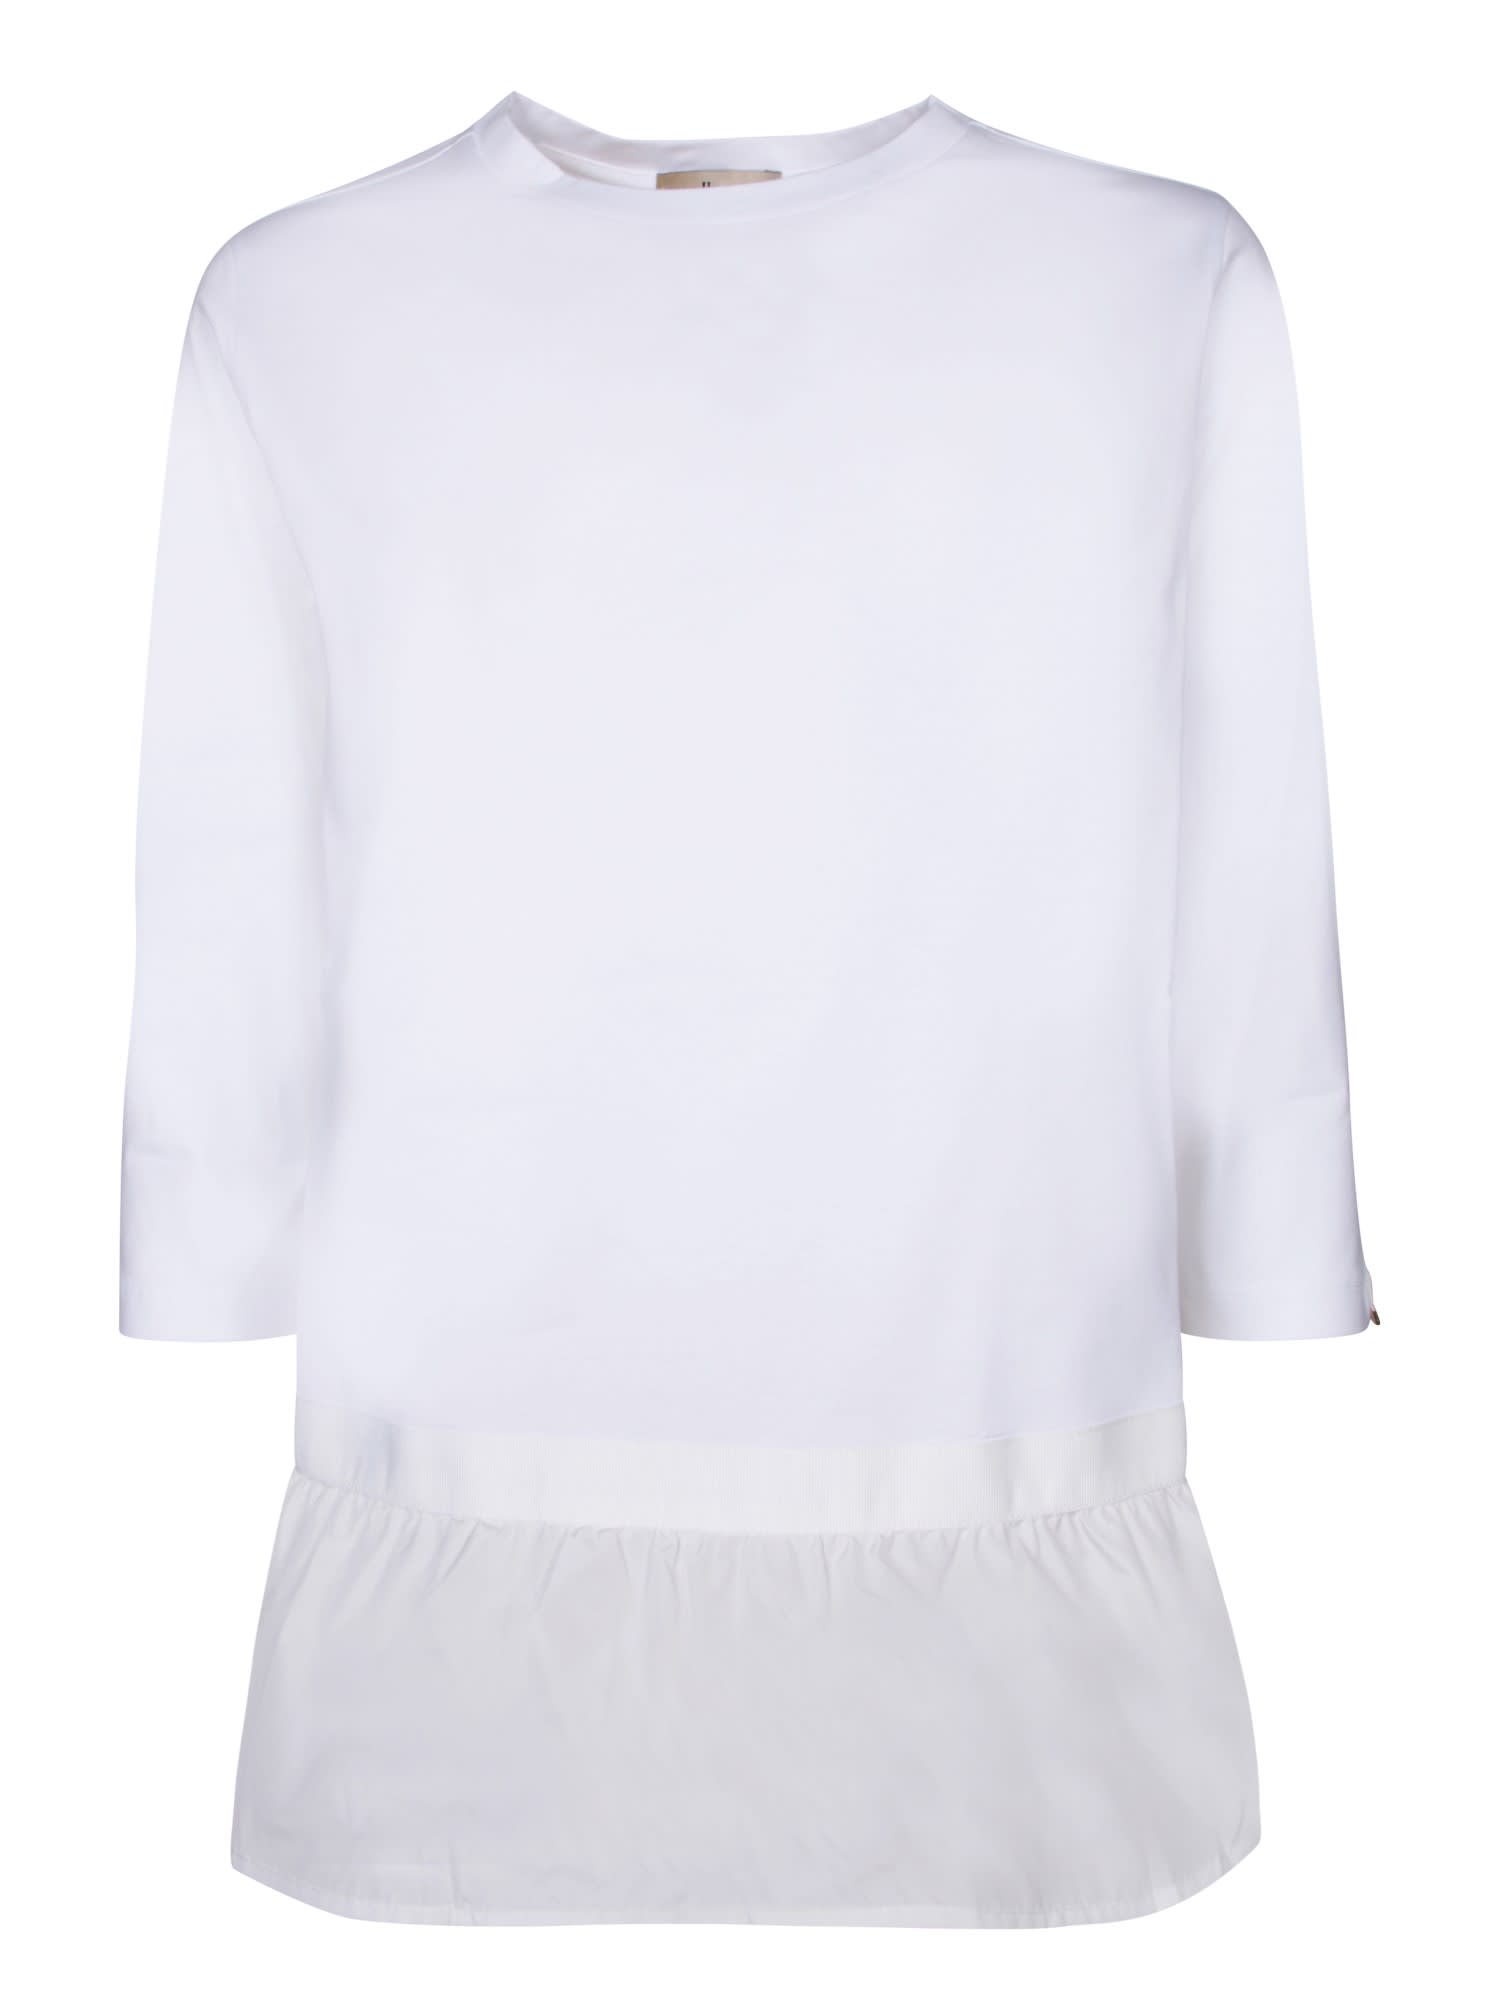 Contrasting Details White T-shirt